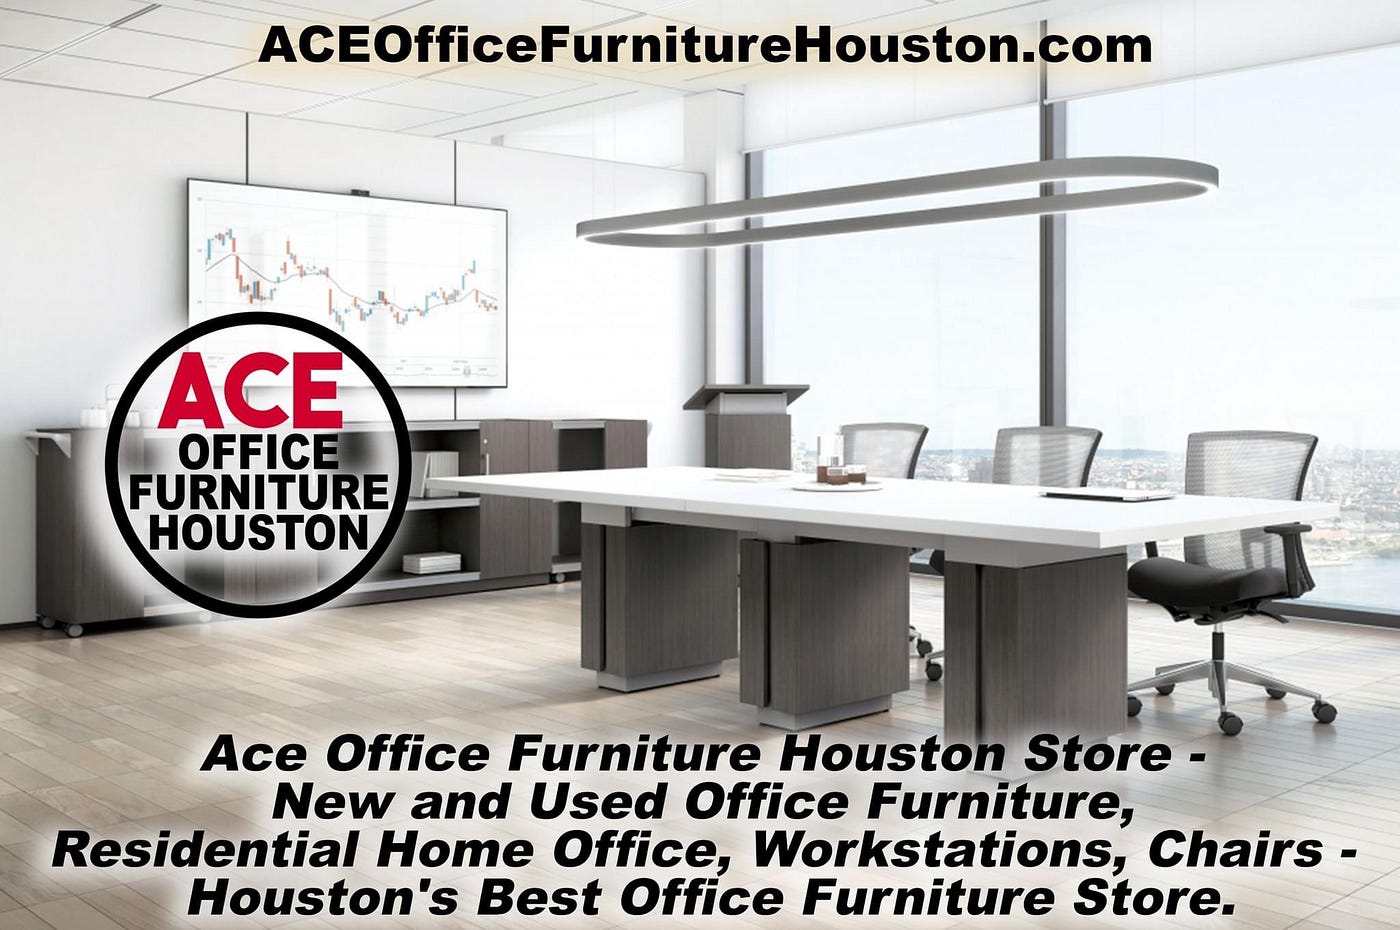 Get Amazing Furniture for Your Offices and Houses in Reasonable